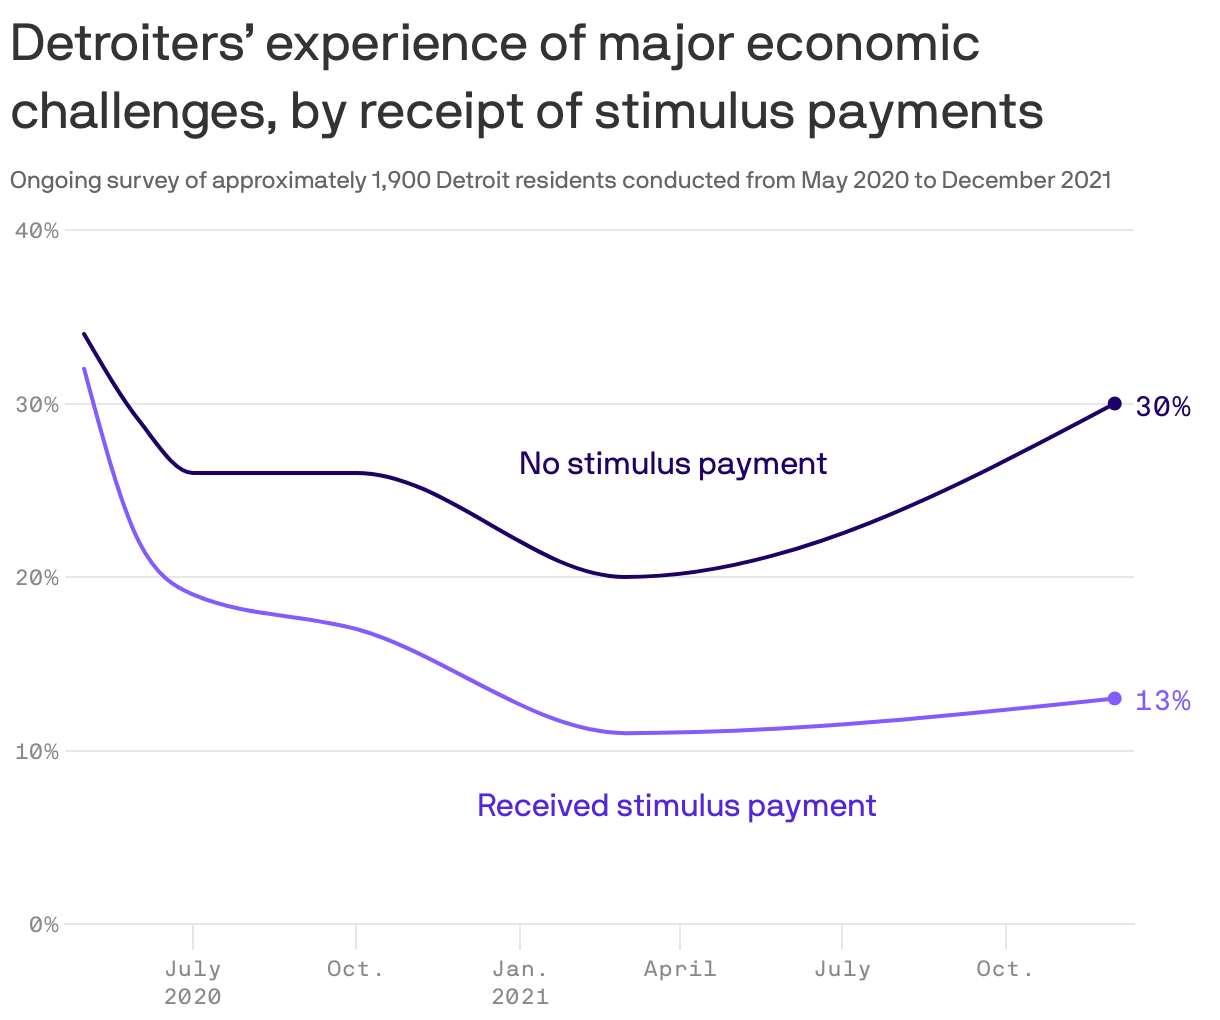 Detroiters’ experience of major economic challenges, by receipt of stimulus payments